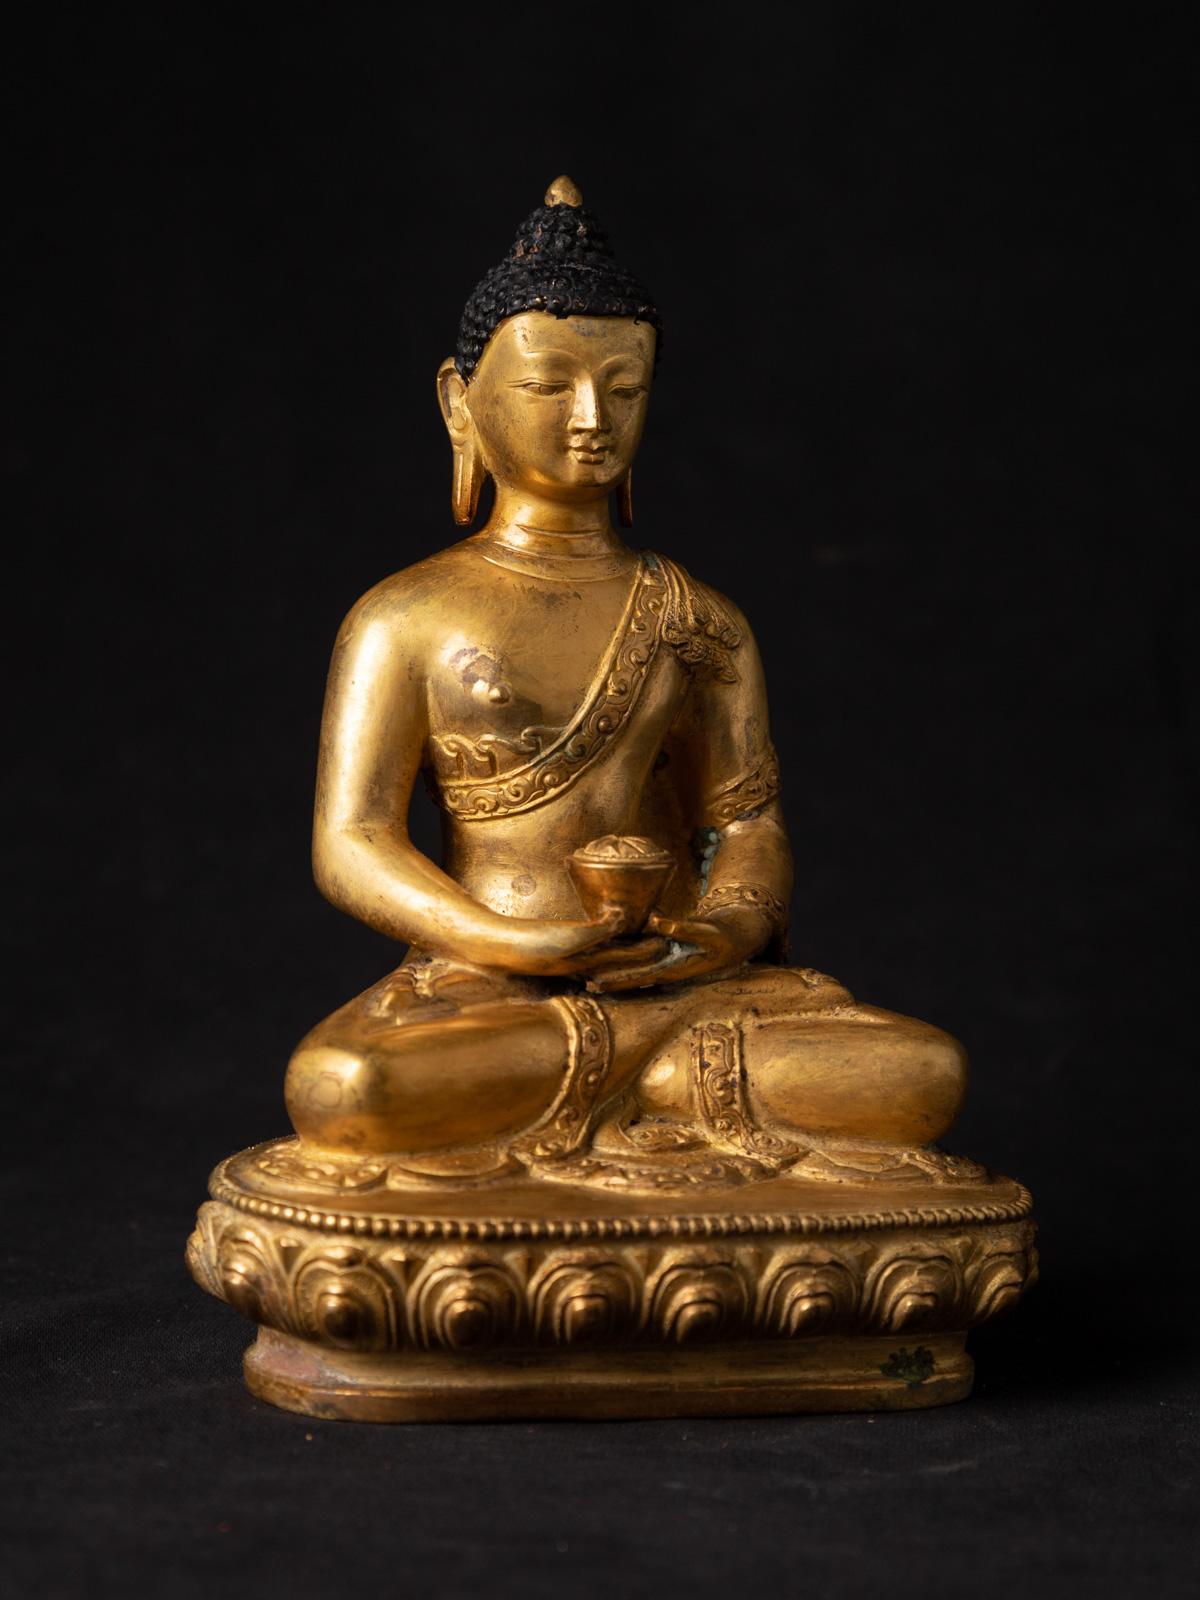 This old bronze Nepali Buddha statue is a captivating and spiritually significant piece of art. Crafted from bronze, it stands at a height of 18.3 cm with dimensions of 12.7 cm in width and 8.8 cm in depth. The statue beautifully depicts the Buddha